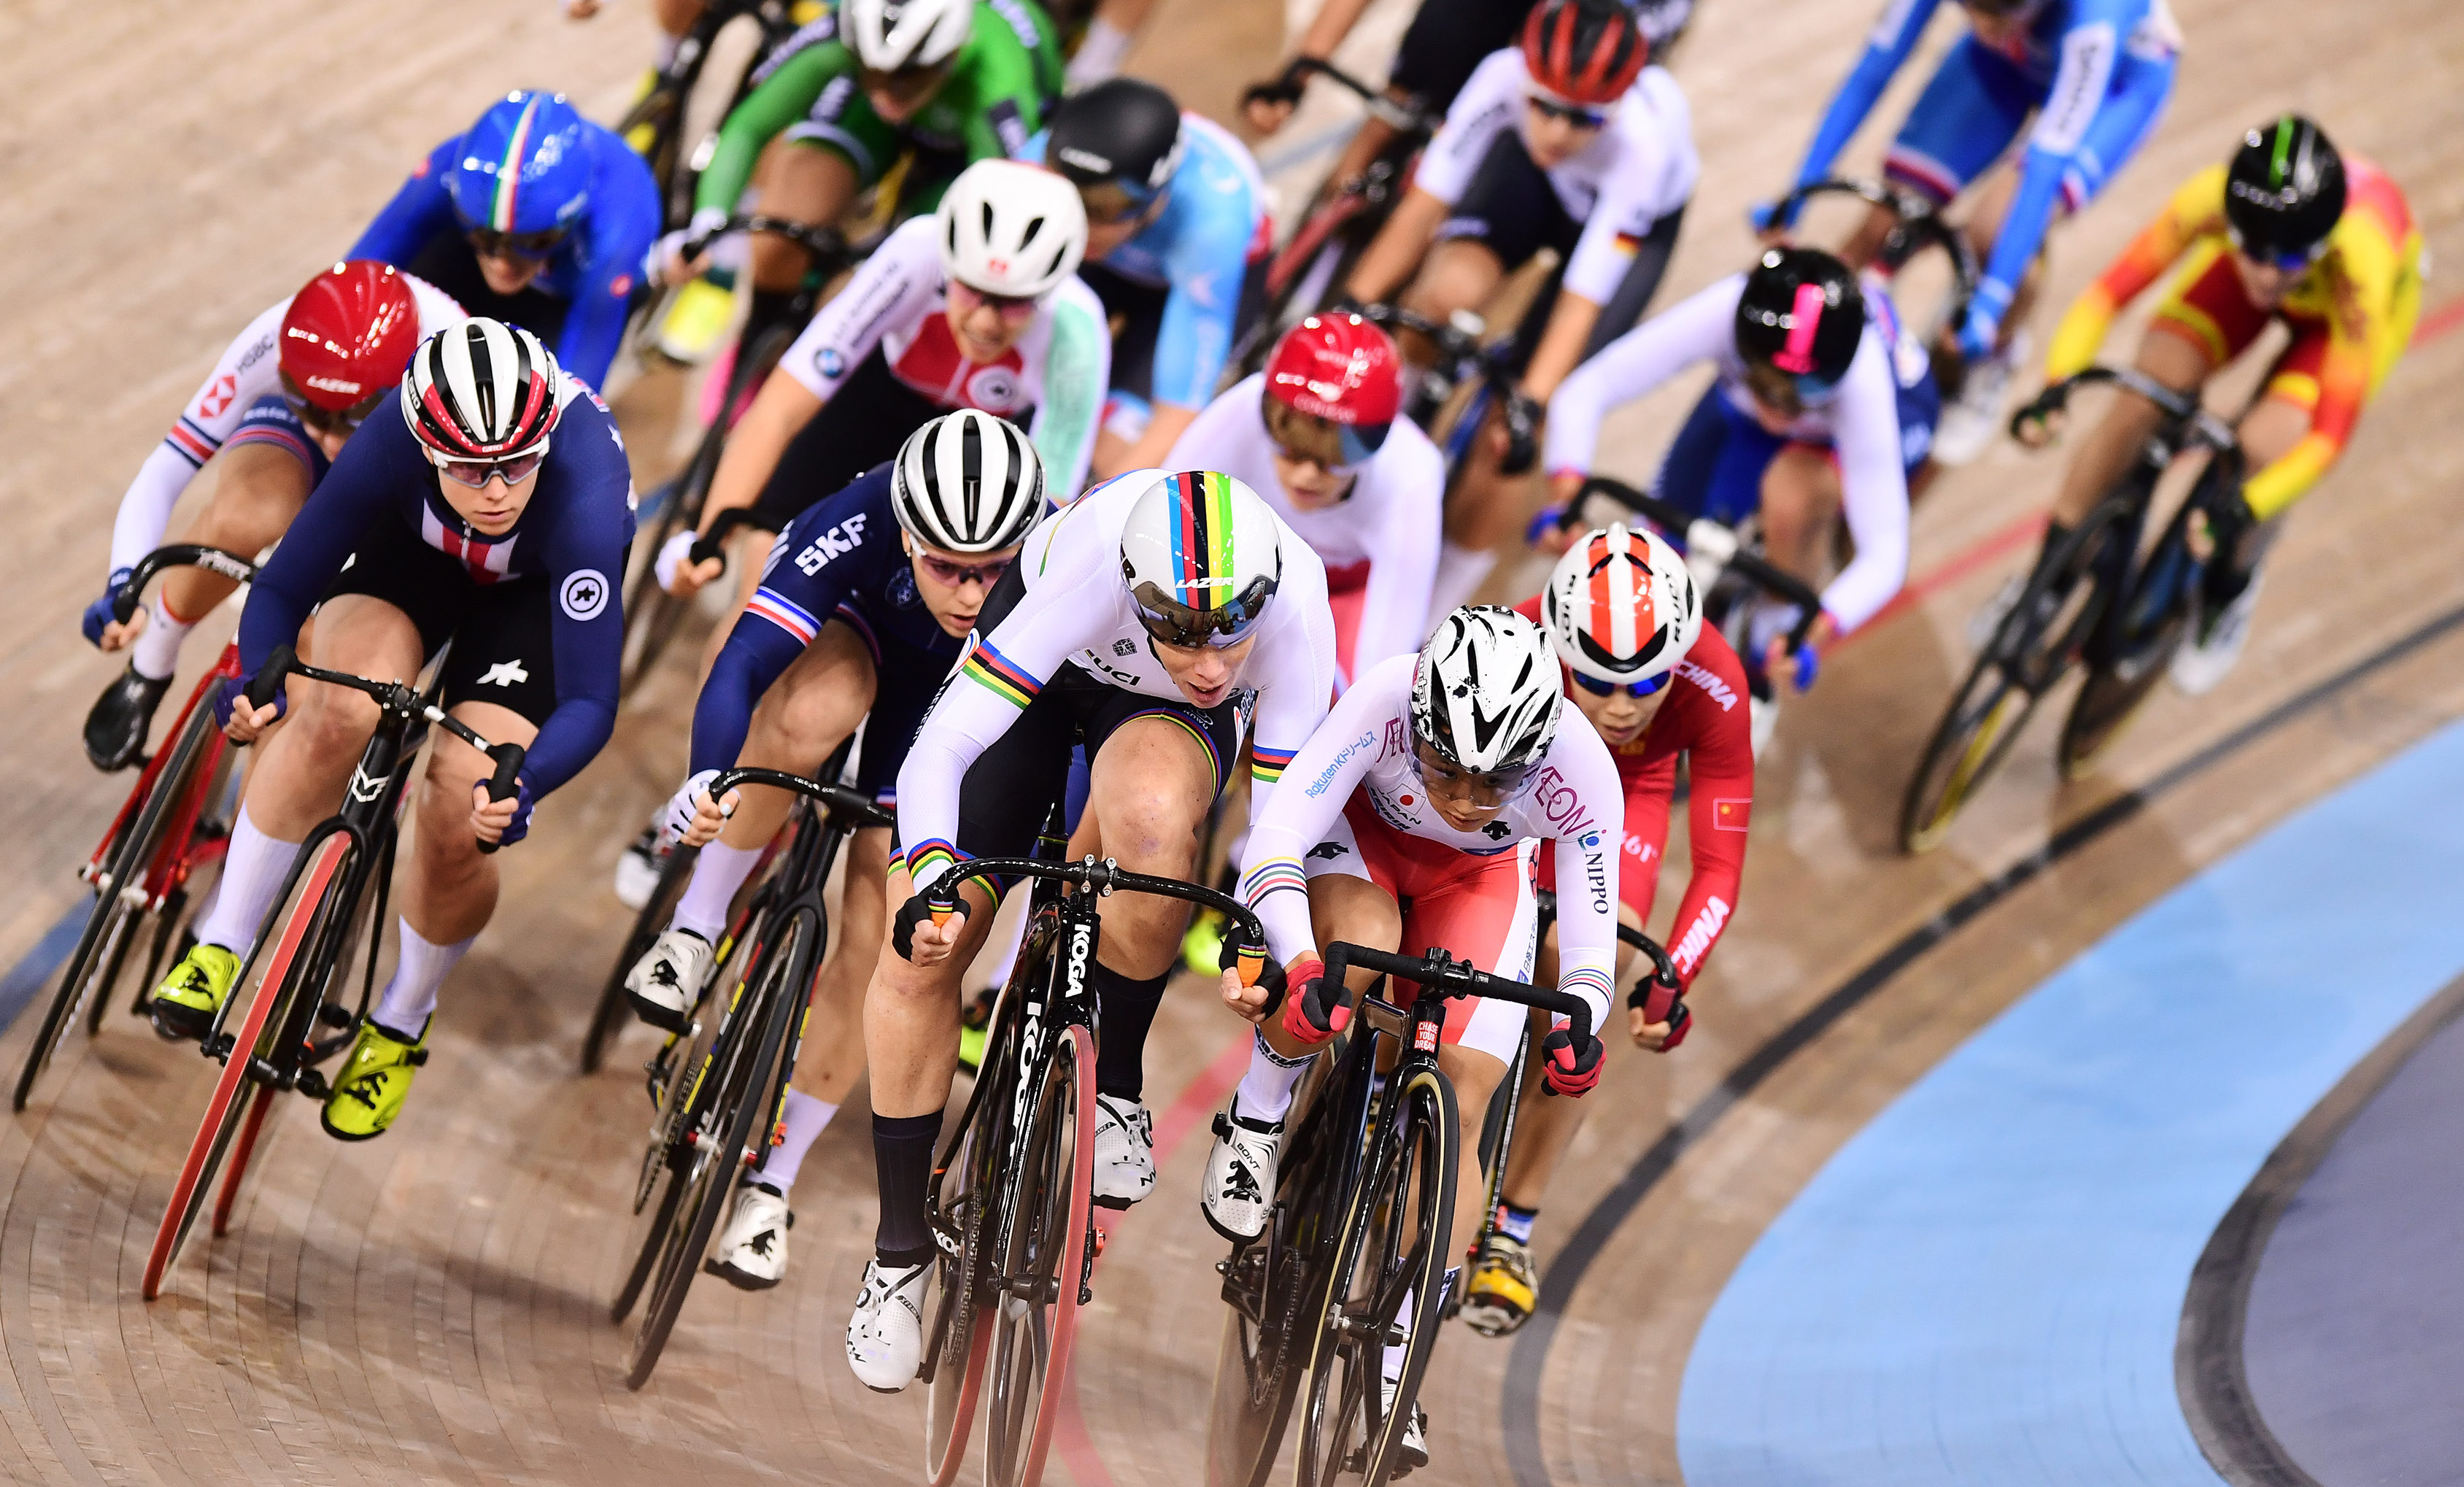 Track cycling stars come to Glasgow.